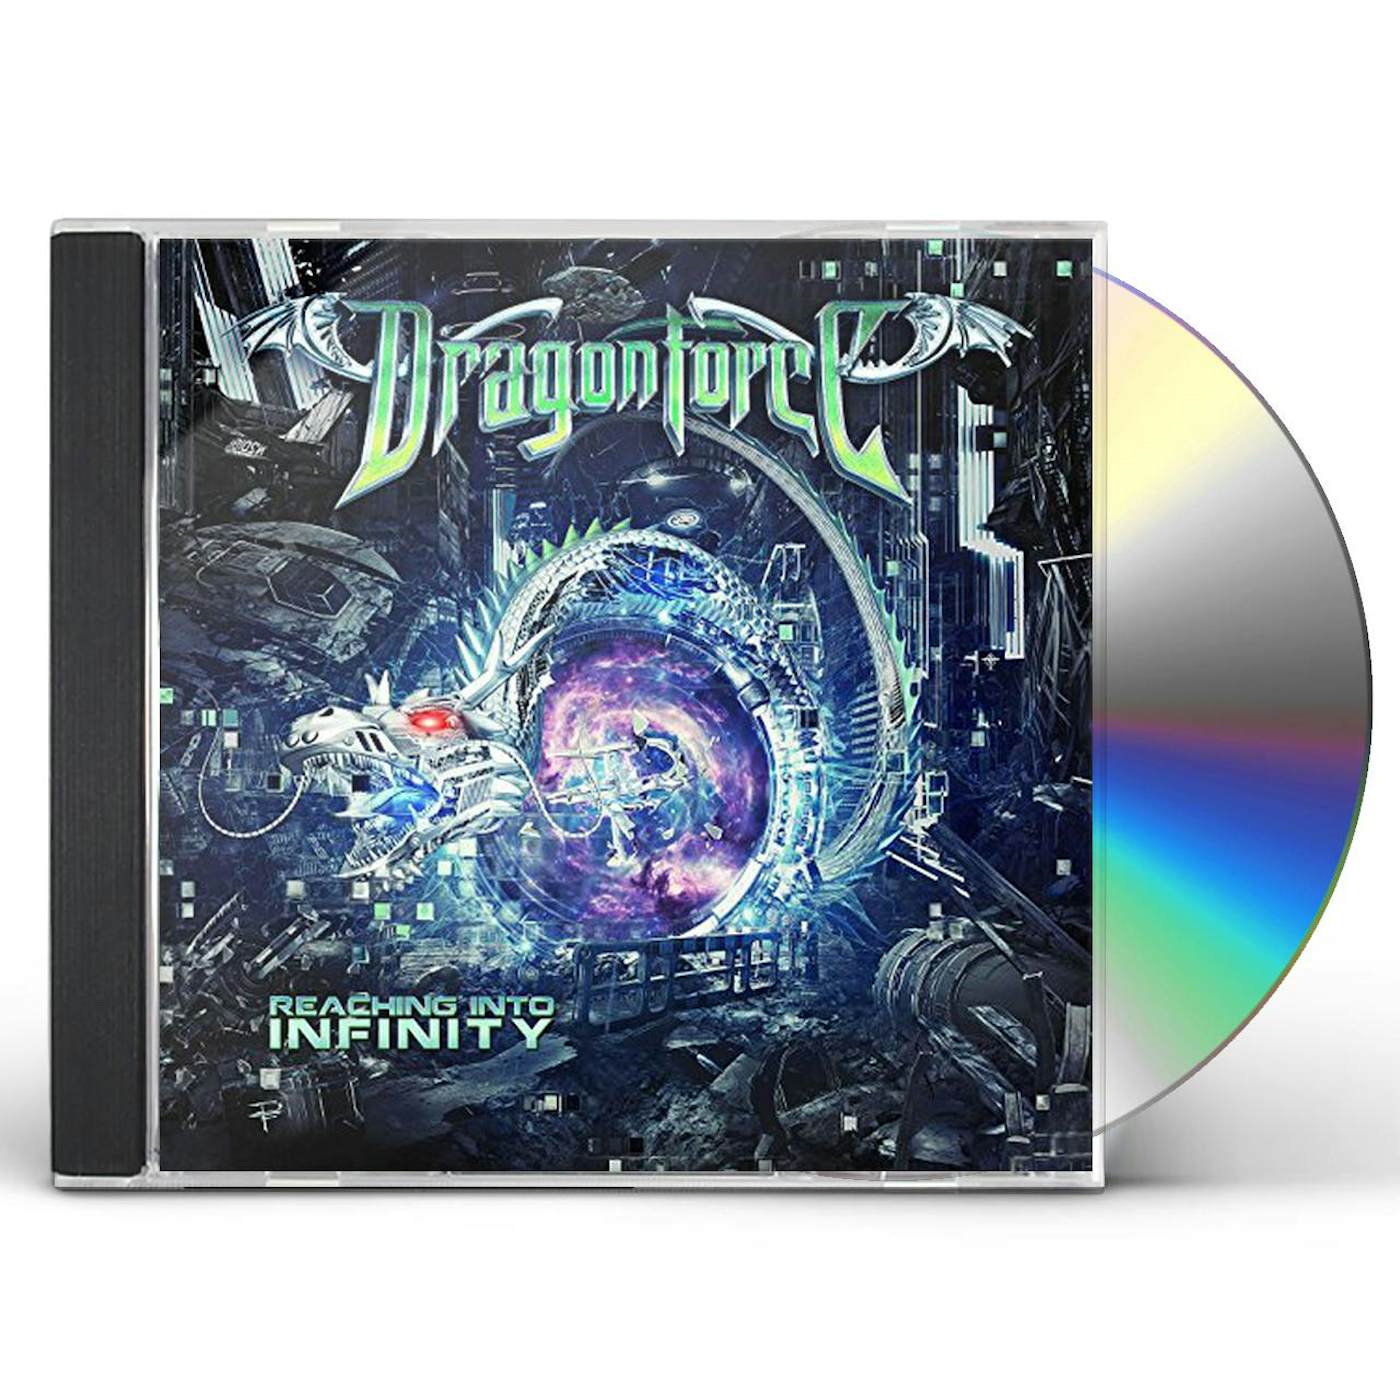 DragonForce REACHING INTO INFINITY: SPECIAL EDITION CD